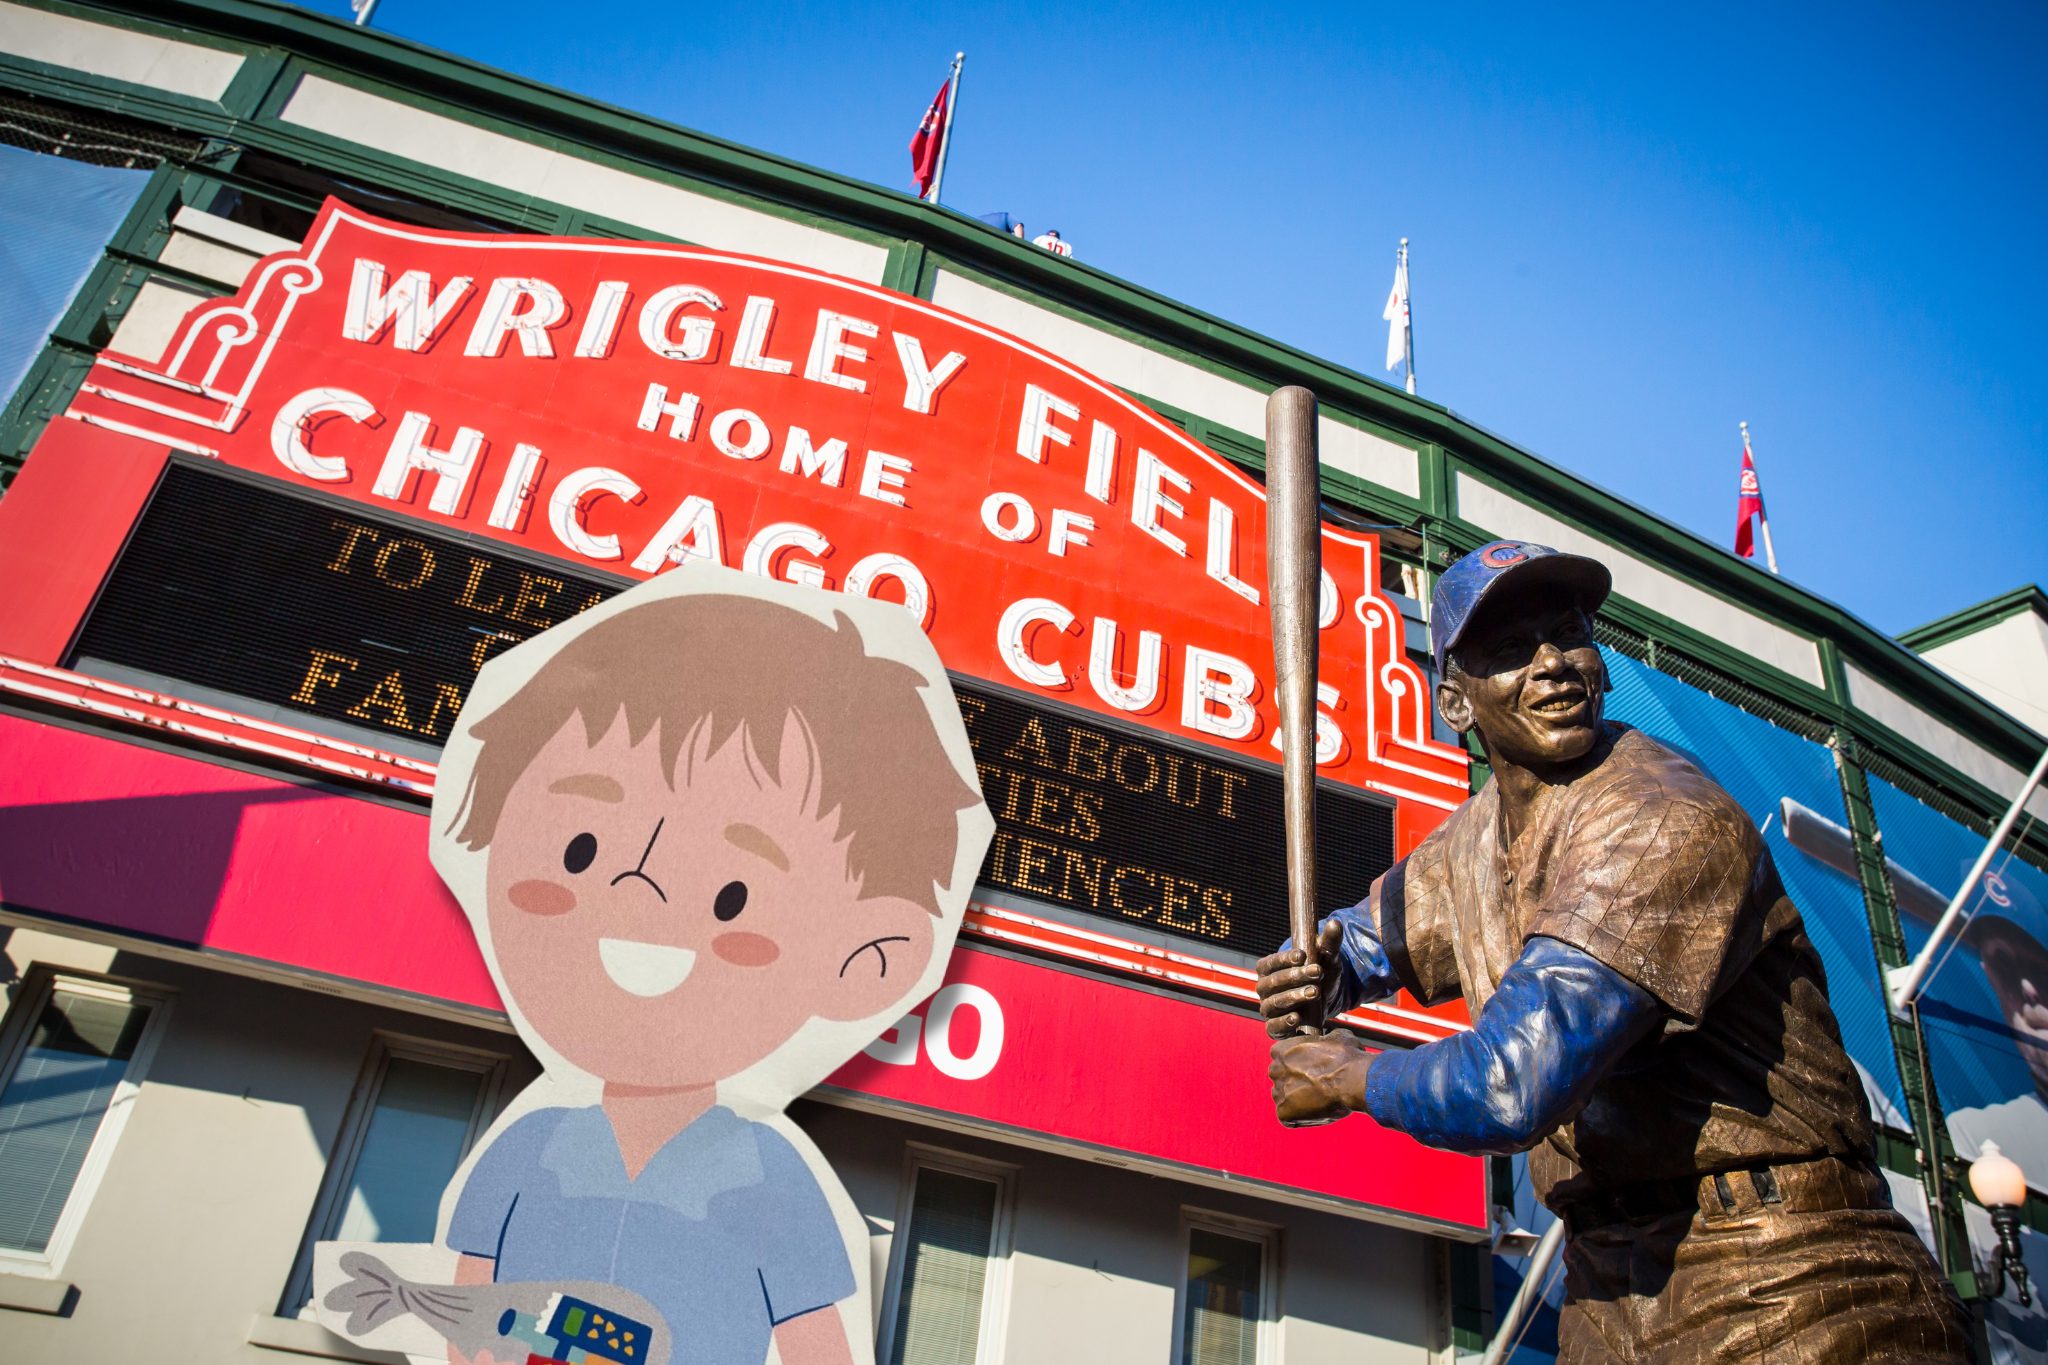 Cut-out character at Wrigley Field